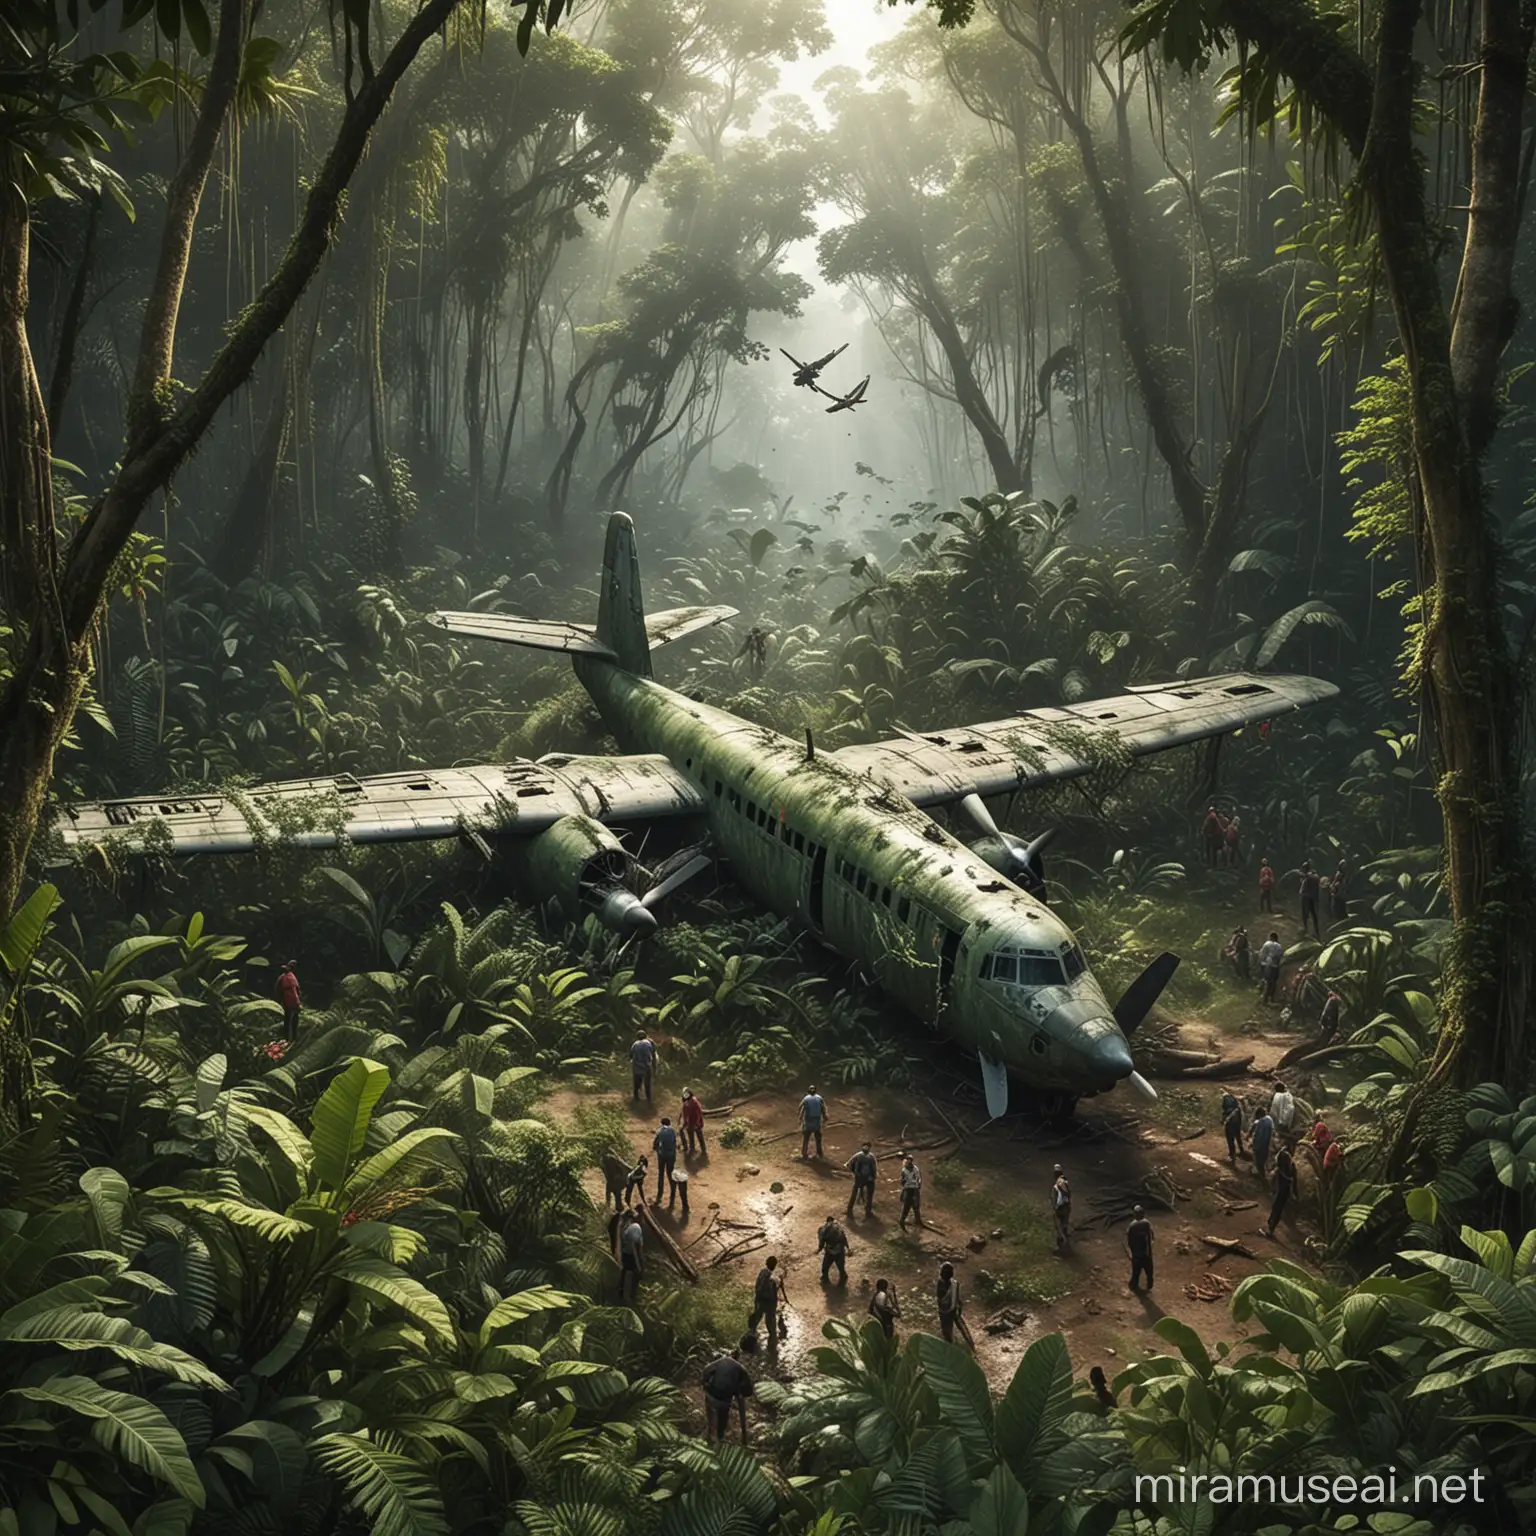 Survival Team Discussing Strategy around Crashed Plane in Jungle